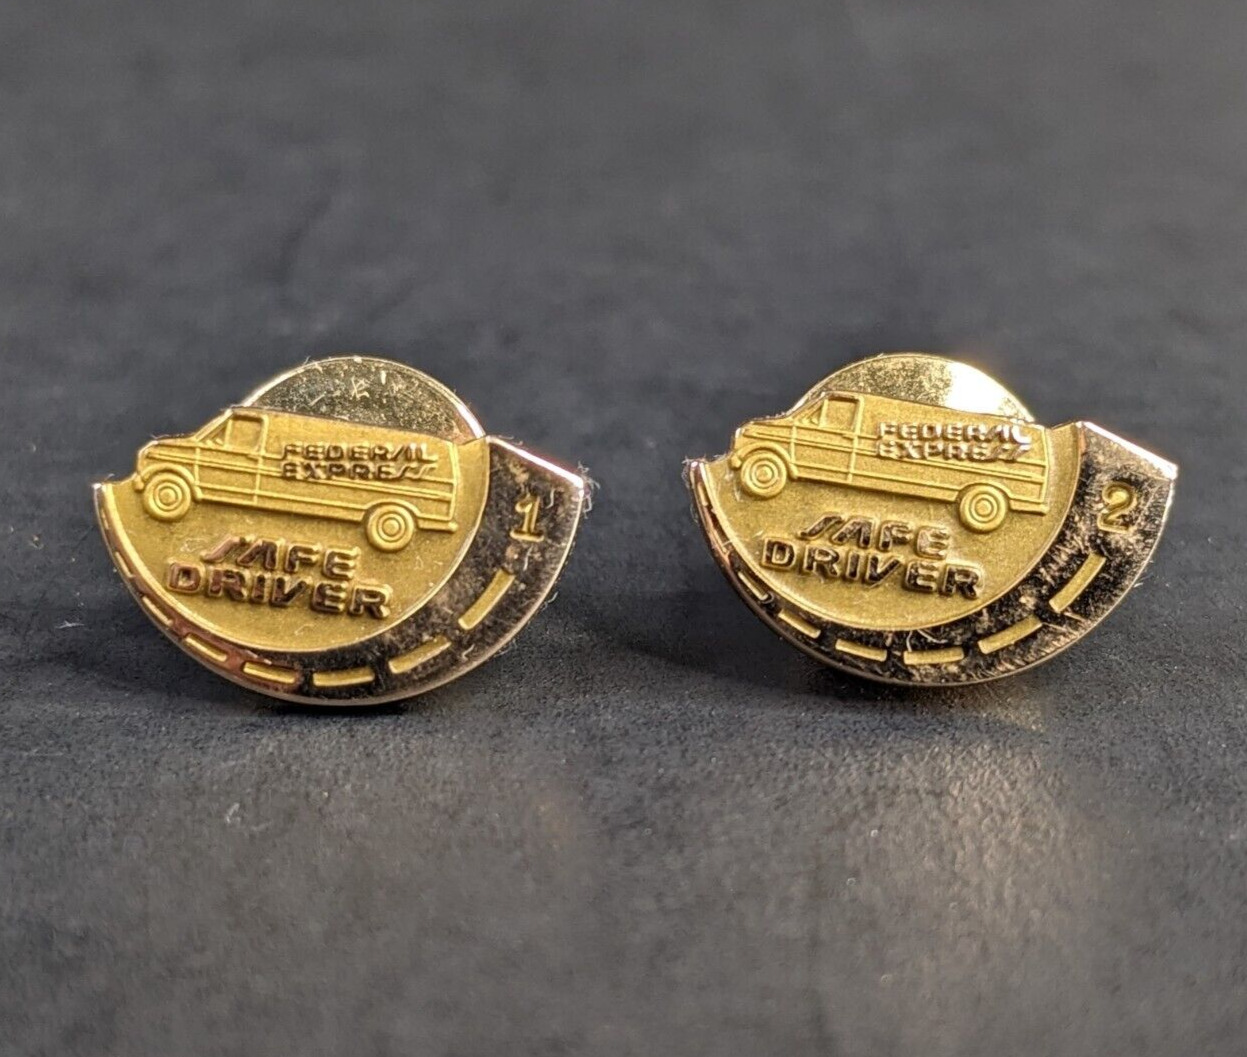 2x Federal Express Safe Driver Gold Pin 1 & 2 Years 1990s Vintage FedEx